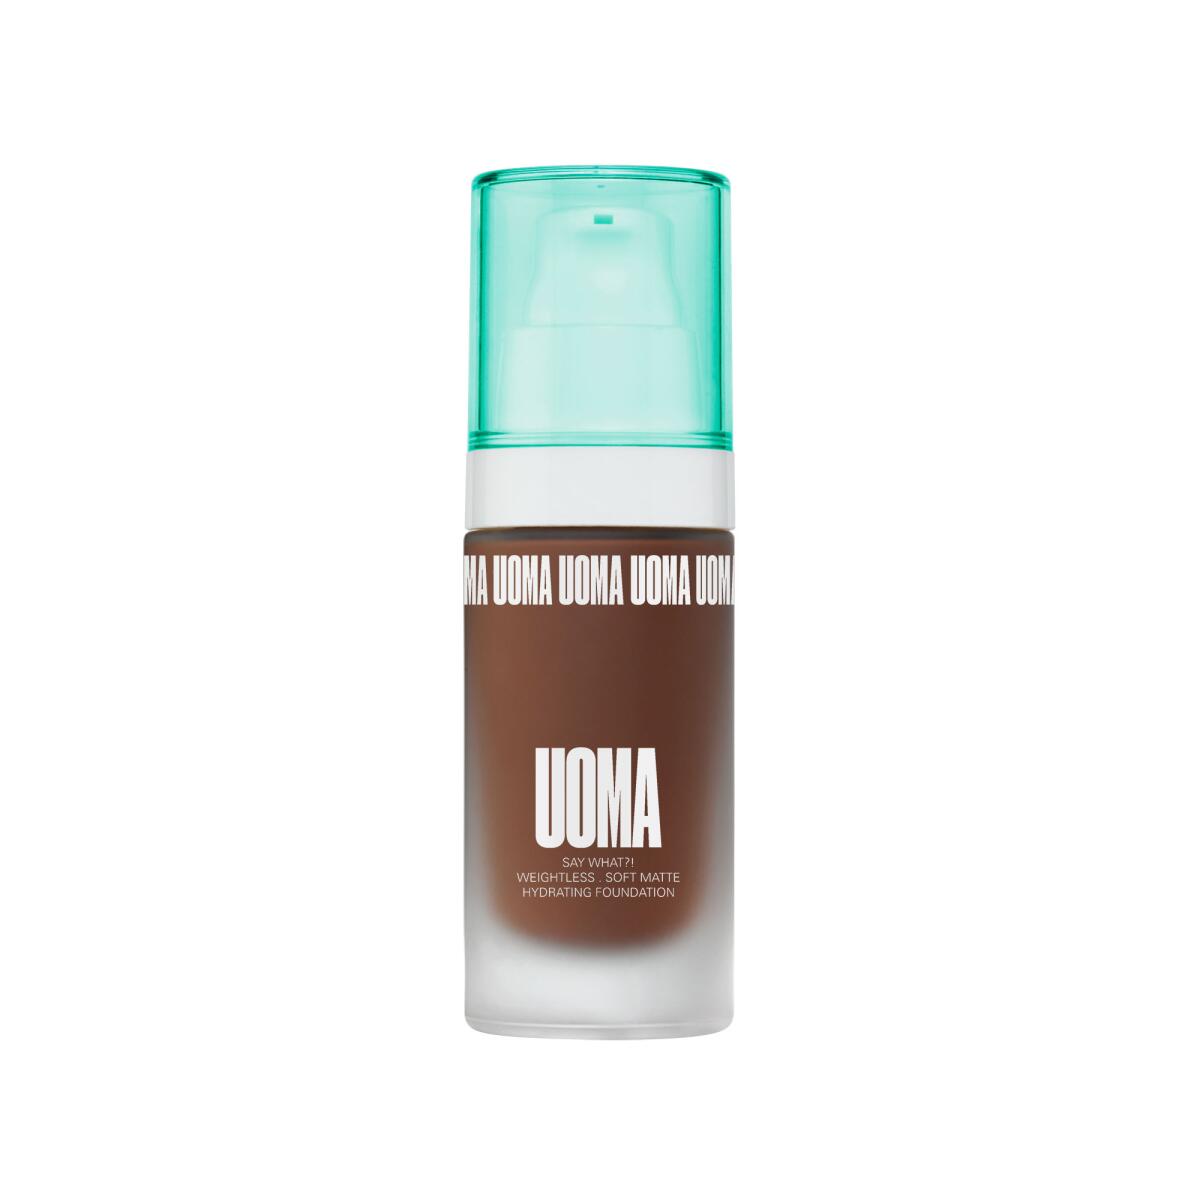 The Uoma Beauty Say What?! Foundation is available in 6 custom formulas across 51 shades.